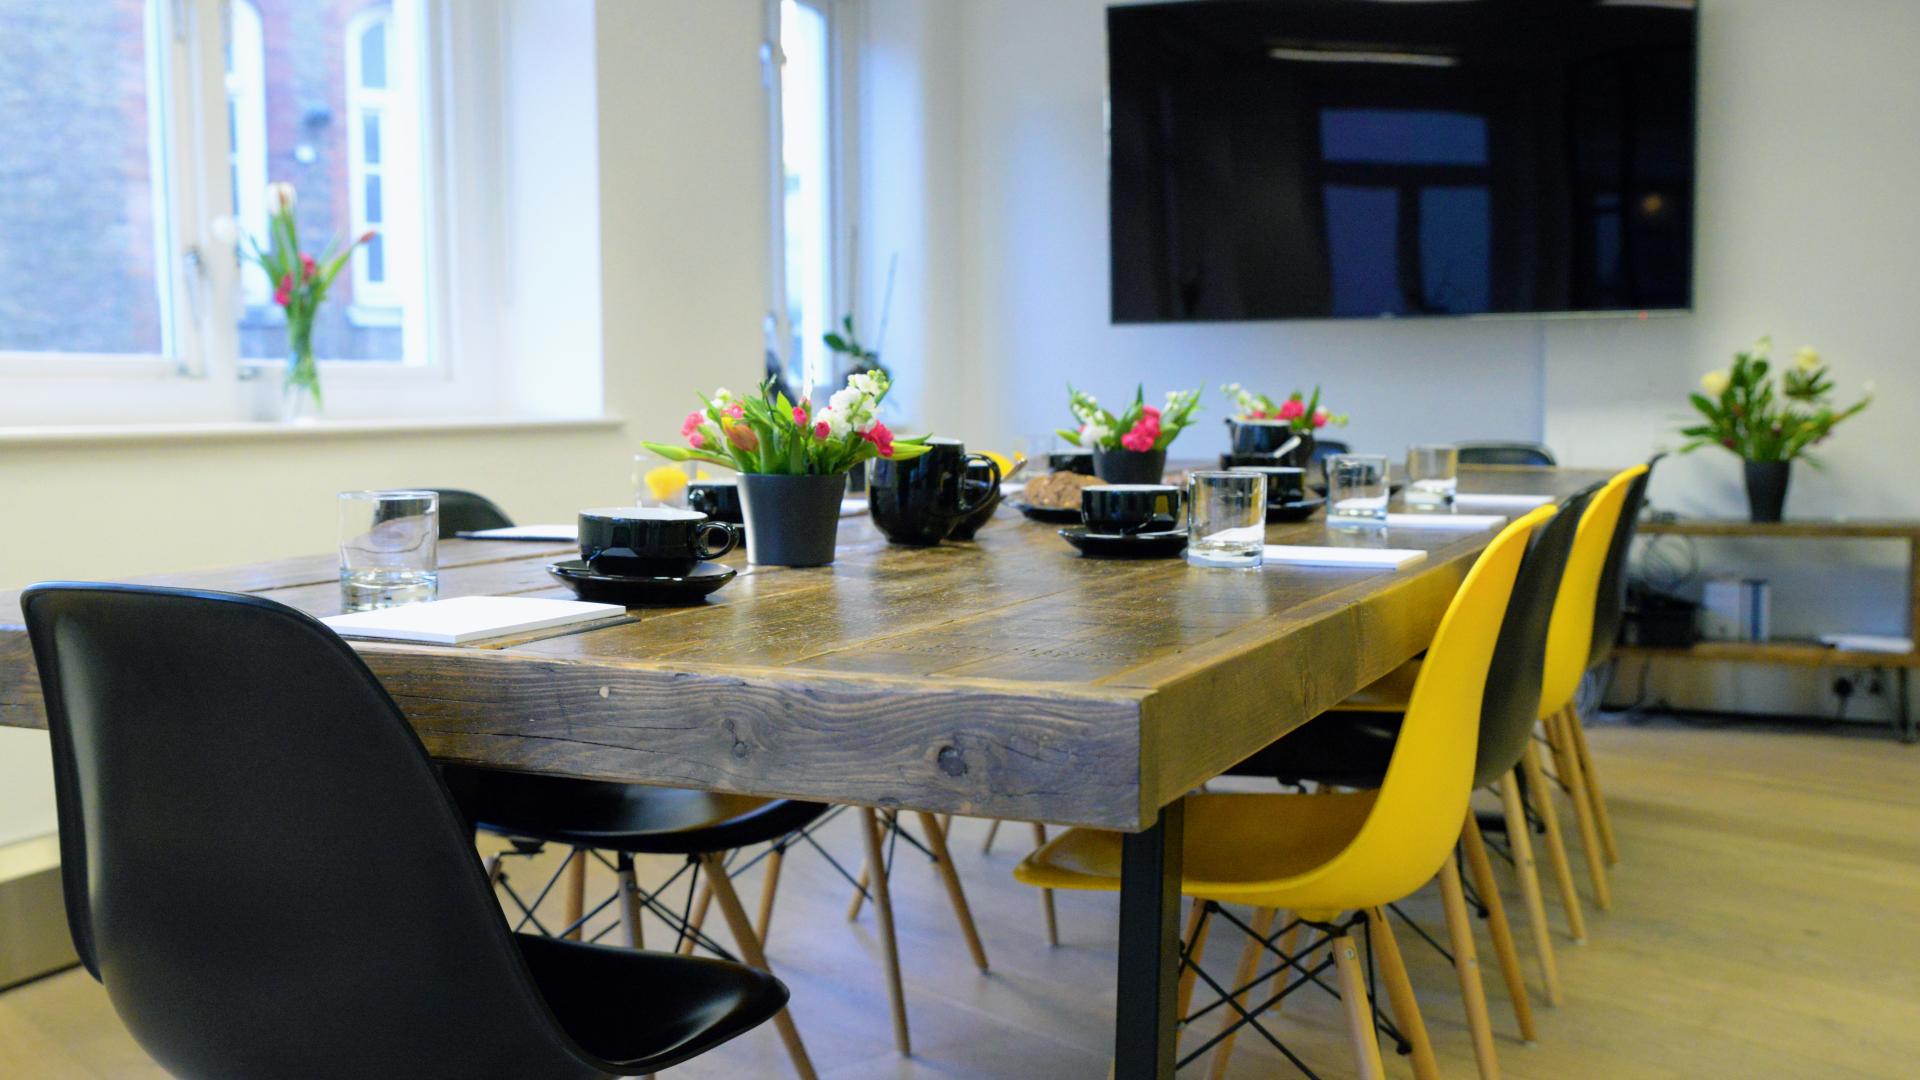 Meeting Rooms for Hire in Soho, London